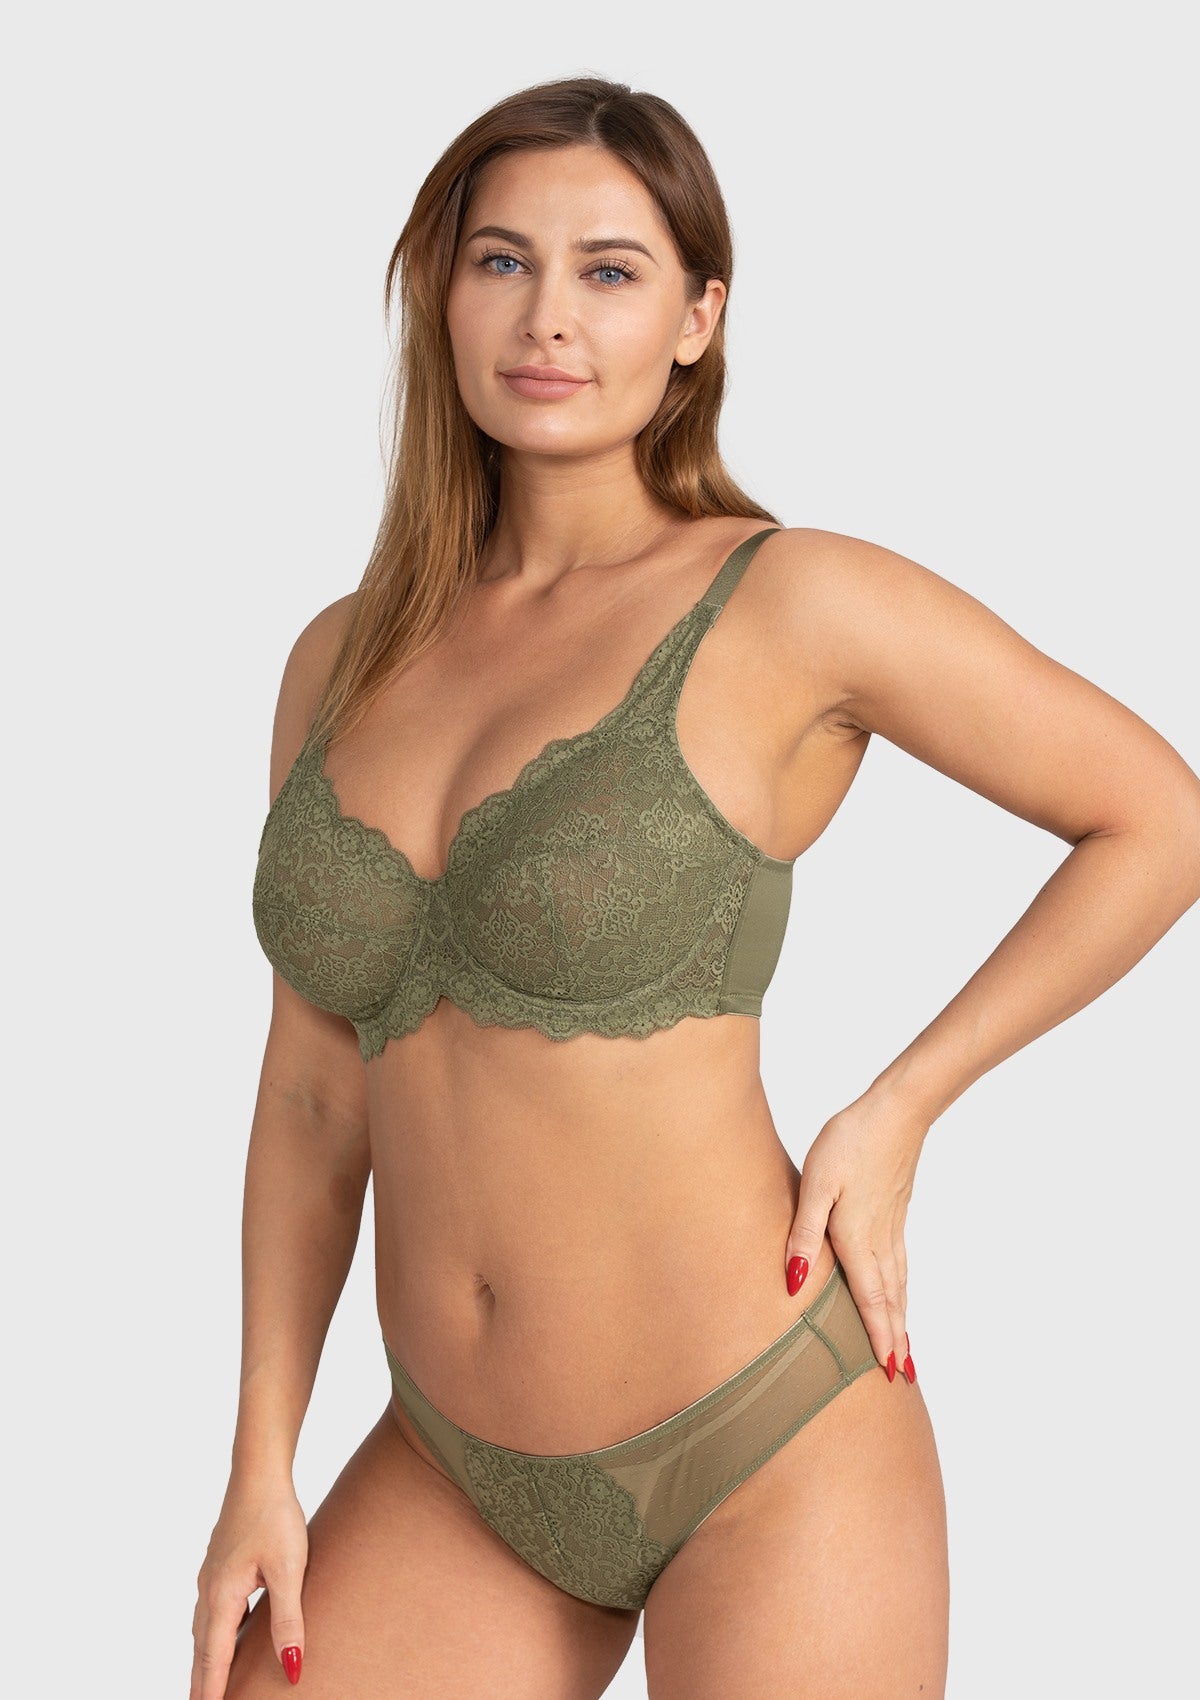 HSIA All-Over Floral Lace Unlined Bra: Minimizer Bra For Heavy Breasts - Dark Green / 38 / C